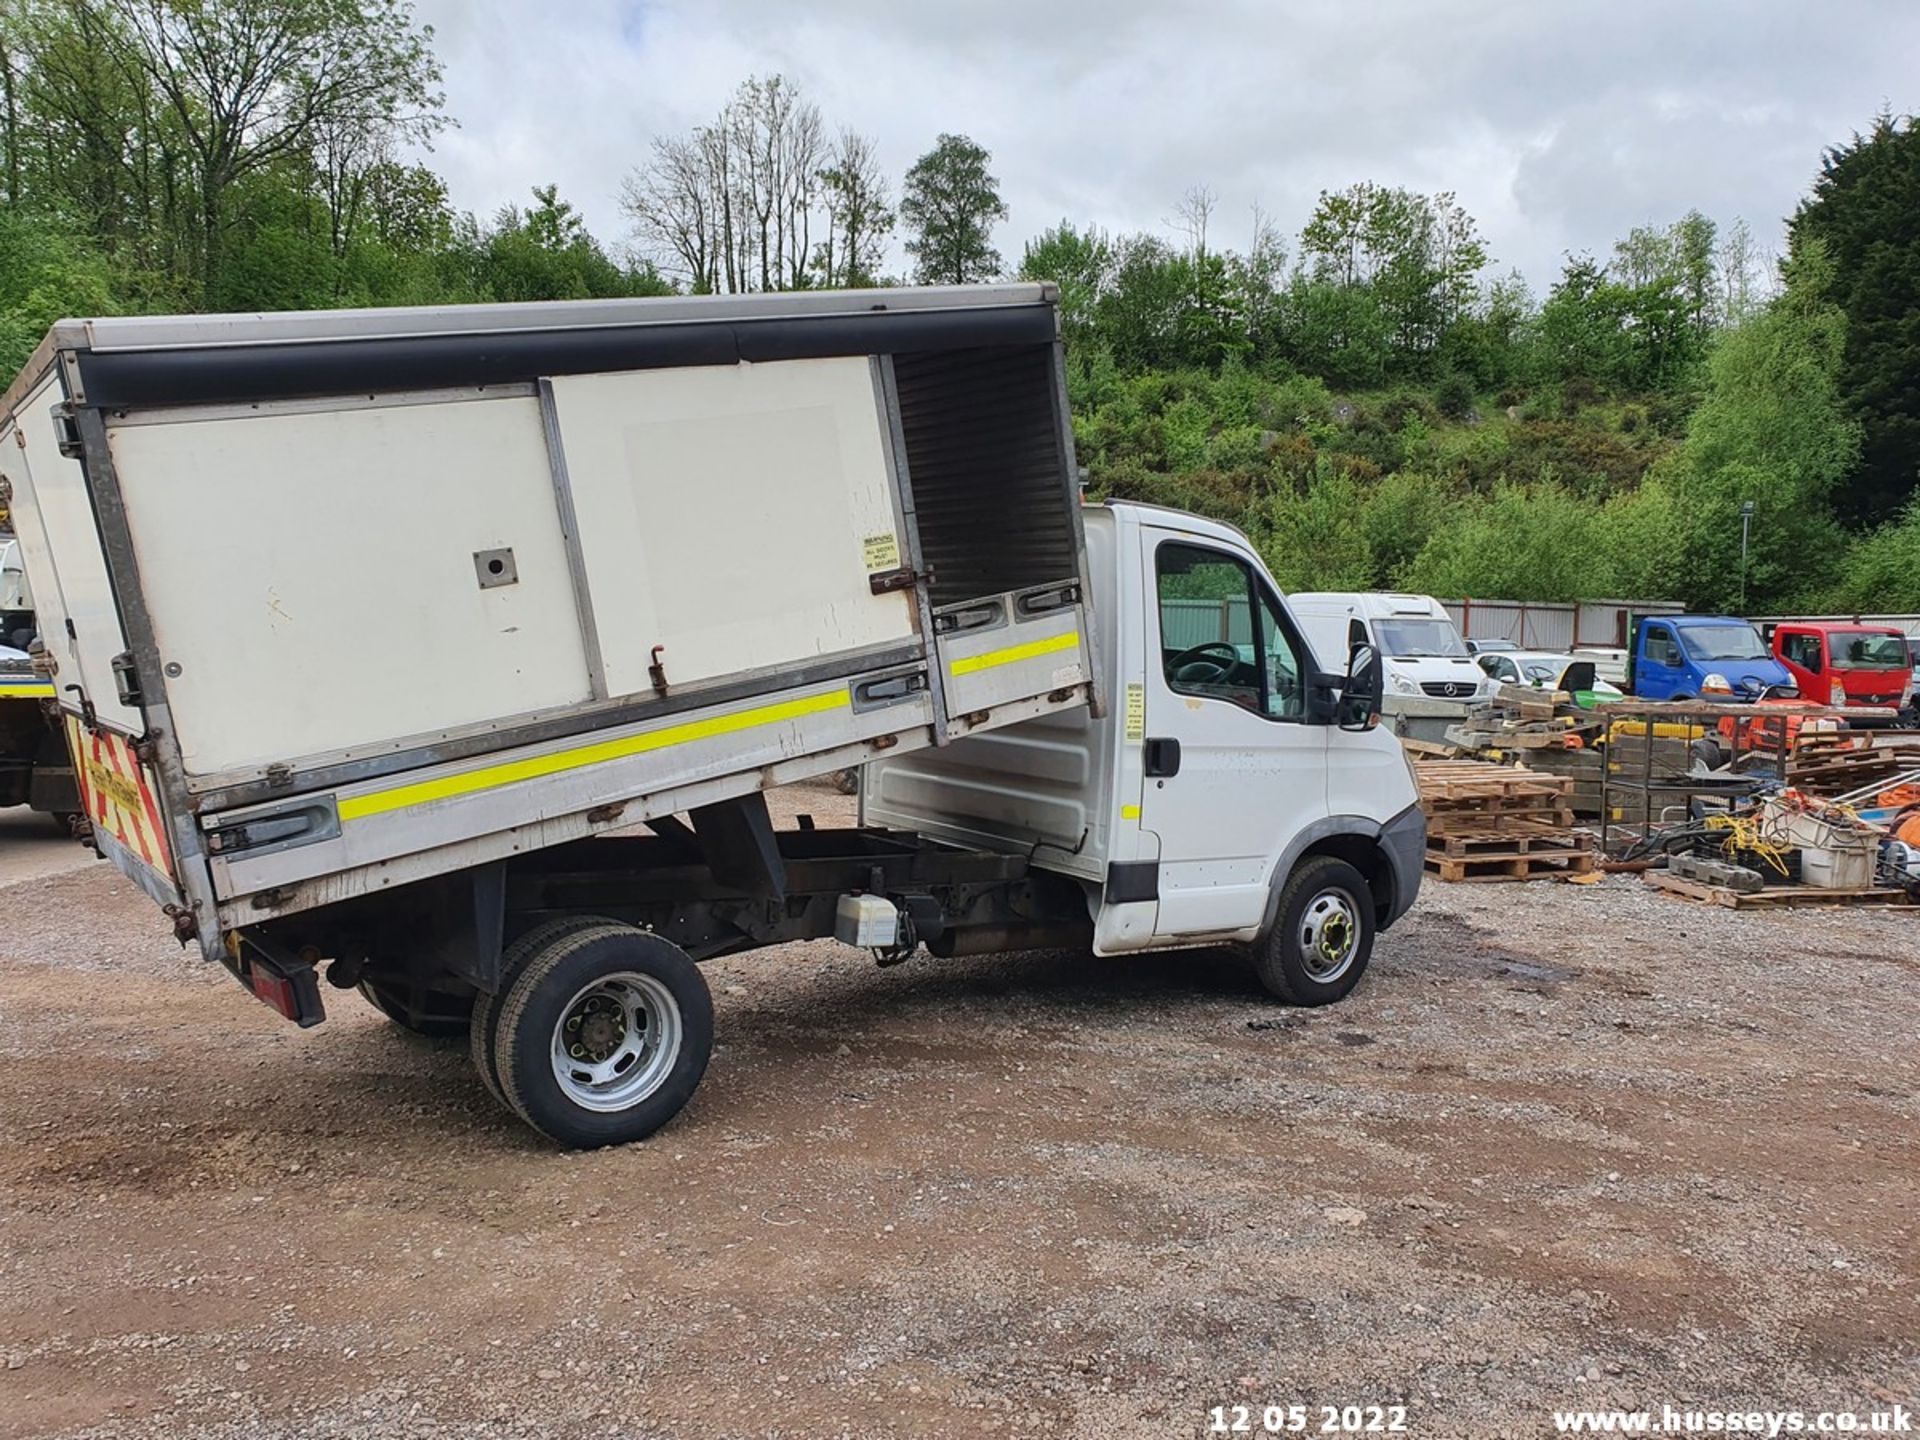 07/57 IVECO DAILY 35C15 MWB - 2998cc 2dr Tipper (White, 212k) - Image 19 of 21